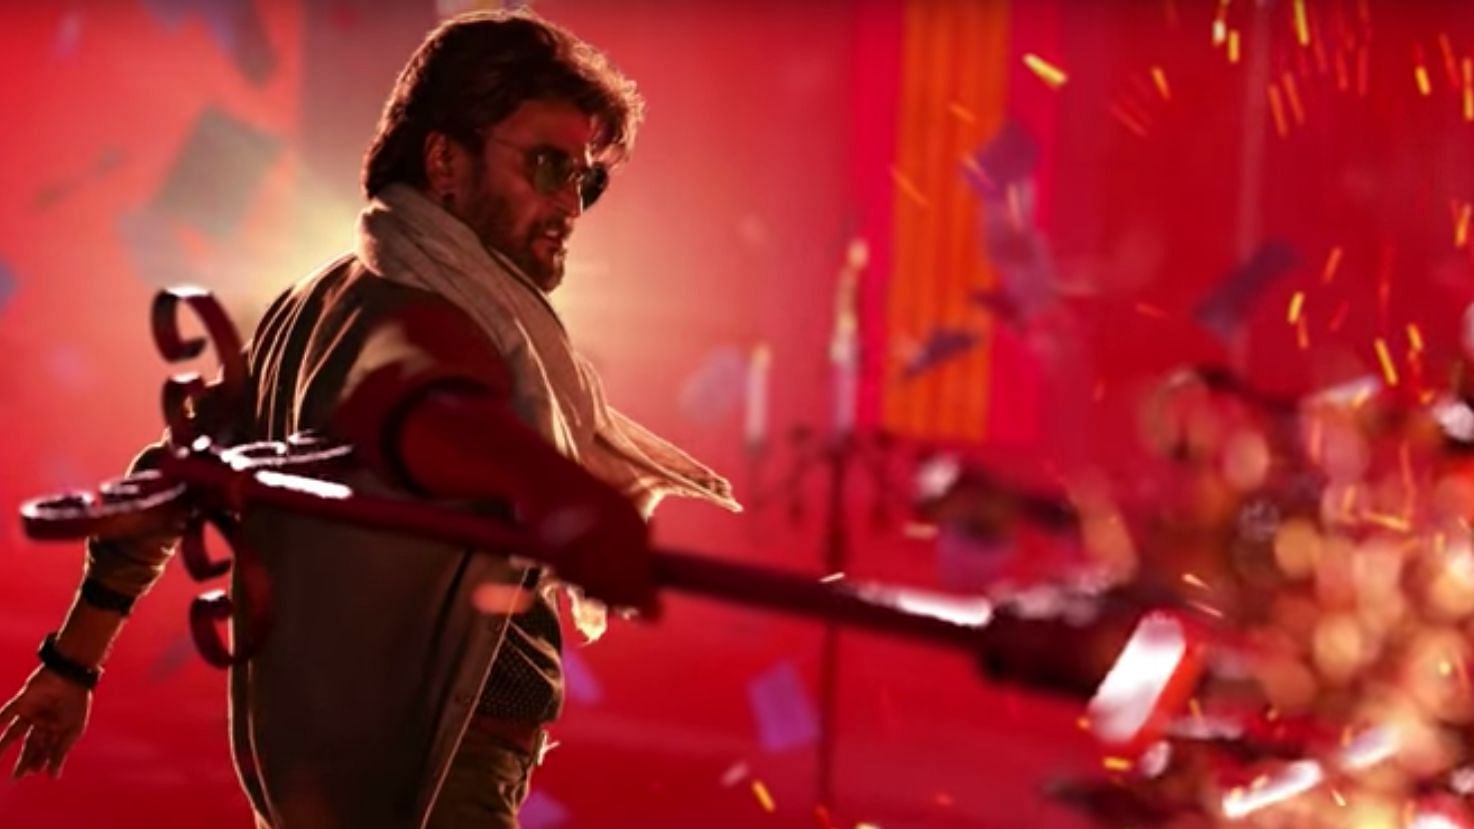 Petta’s songs by Anirudh Ravichandran are nothing less than a tribute to Rajinikanth.